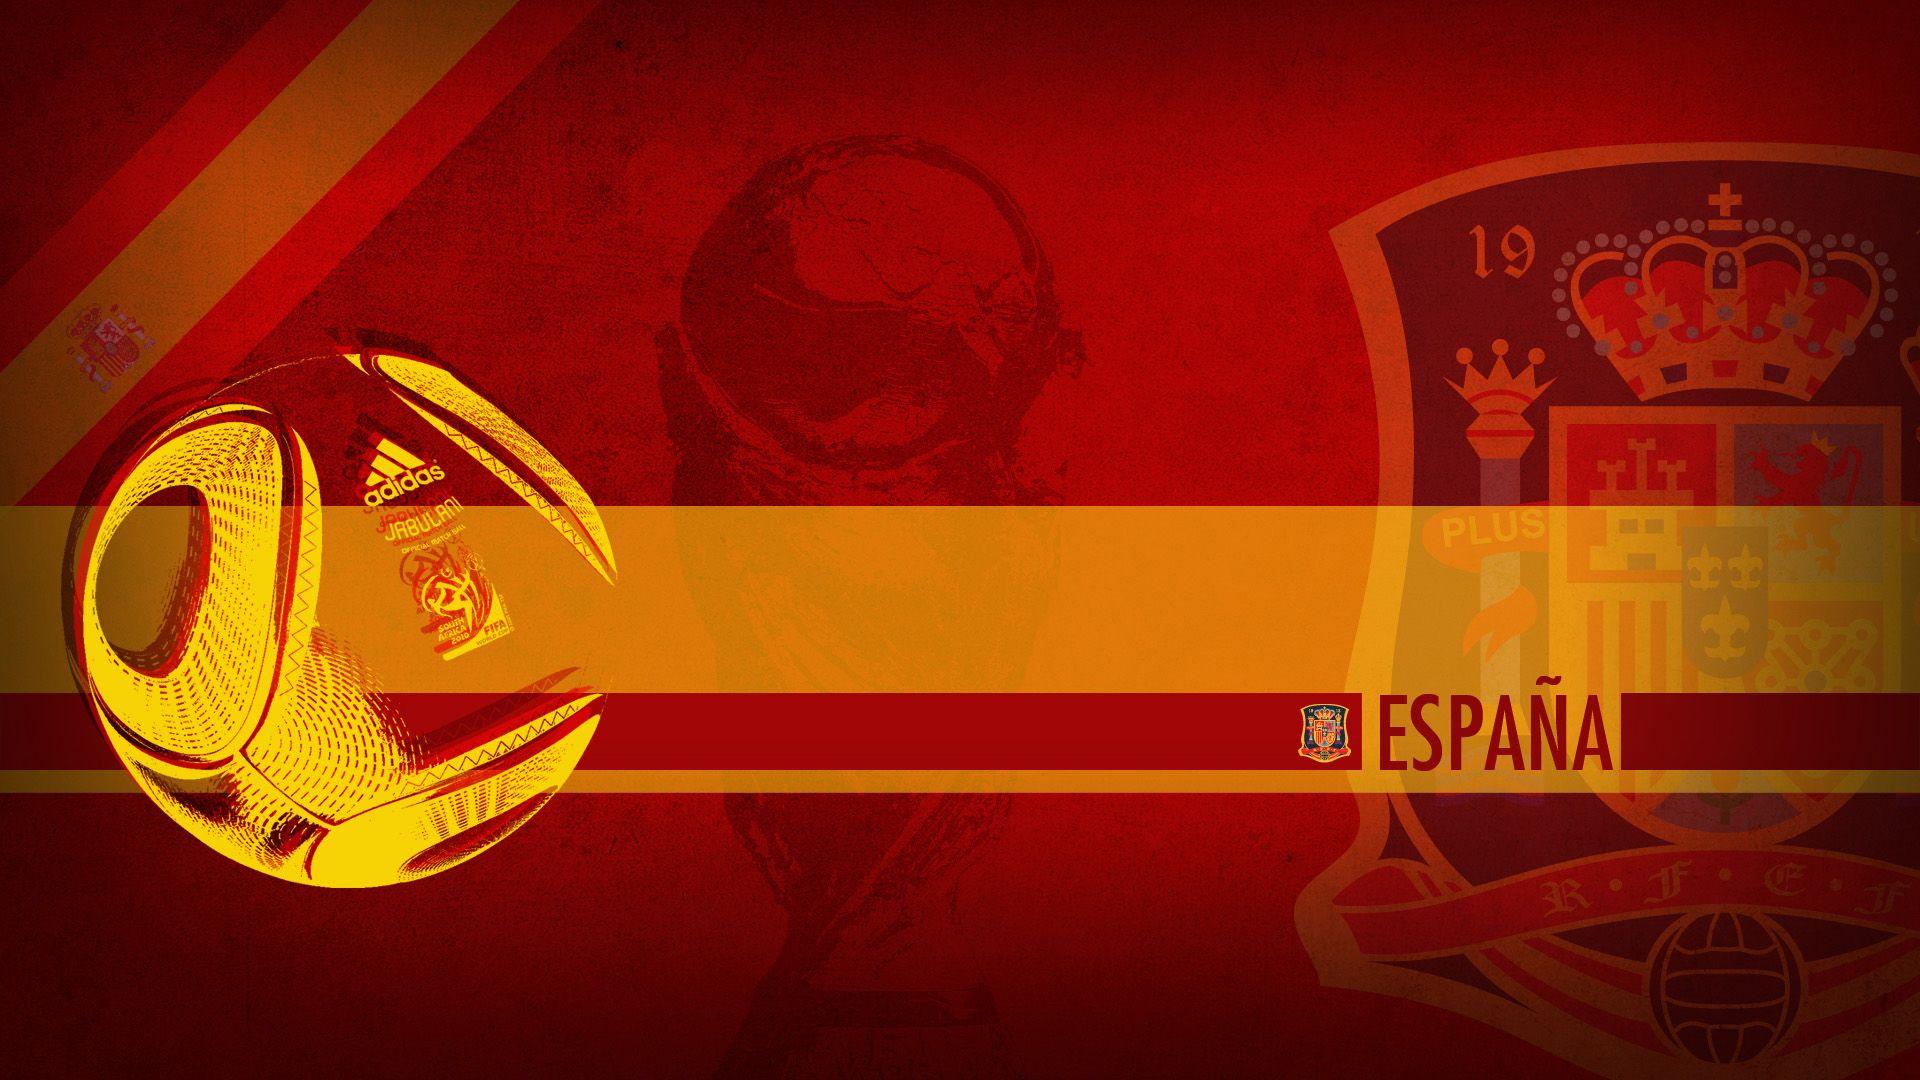 Spain Football Wallpaper, HD Image Spain Football Collection, W